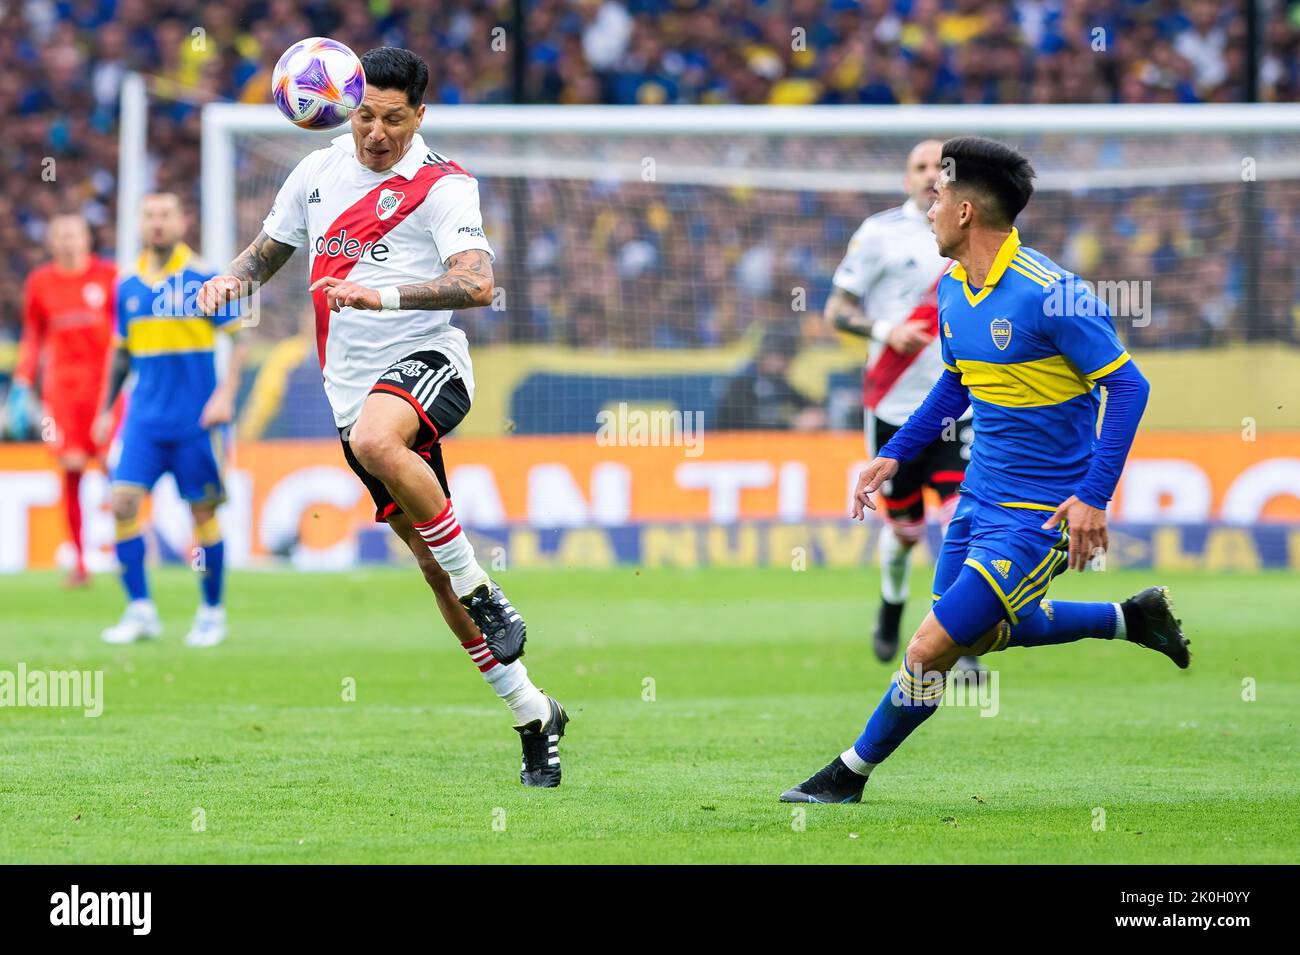 Buenos Aires, Argentina. 11th Sep, 2022. Enzo Perez (L) of River Plate and Guillermo Matías Fernández (R) of Boca Juniors seen in action during a match between Boca Juniors and River Plate as part of Liga Profesional 2022 at Estadio Alberto J. Armando.(Final score; Boca Juniors 1:0 River Plate) (Photo by Manuel Cortina/SOPA Images/Sipa USA) Credit: Sipa USA/Alamy Live News Stock Photo